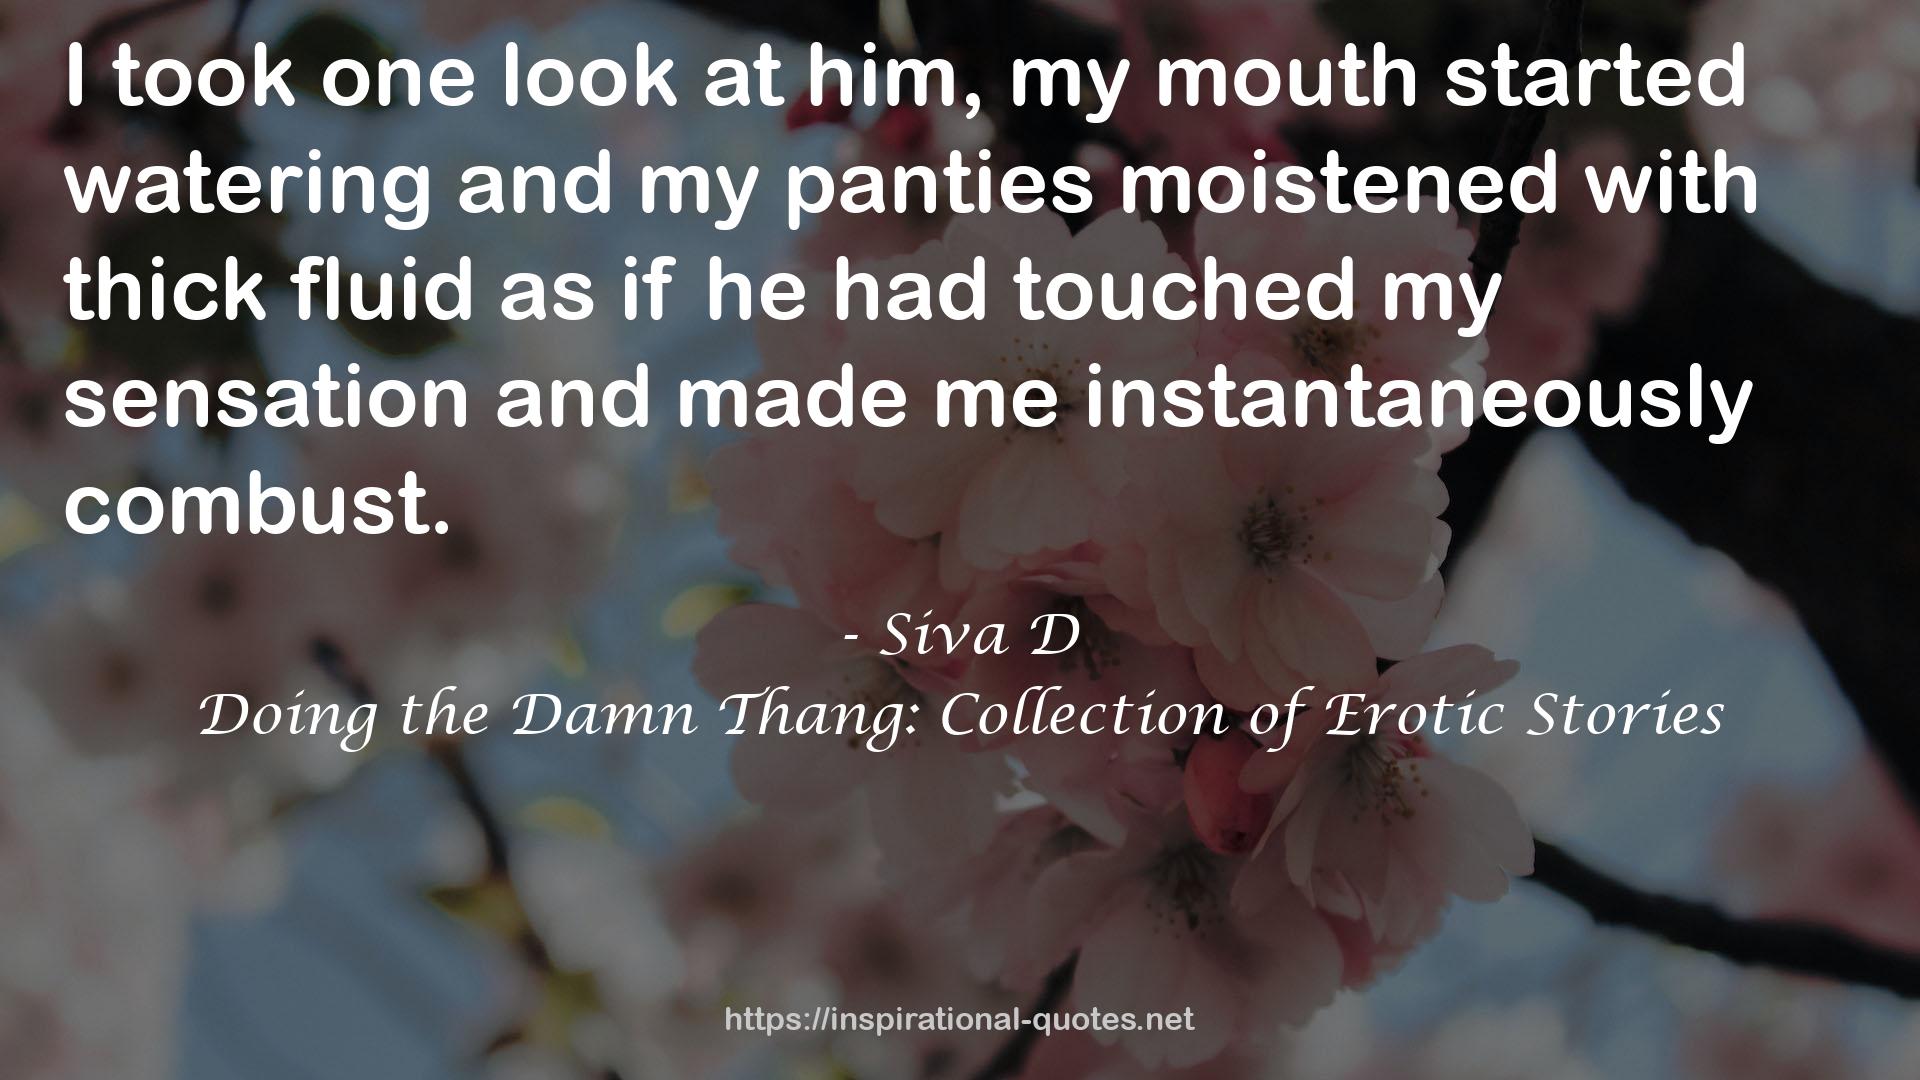 Doing the Damn Thang: Collection of Erotic Stories QUOTES